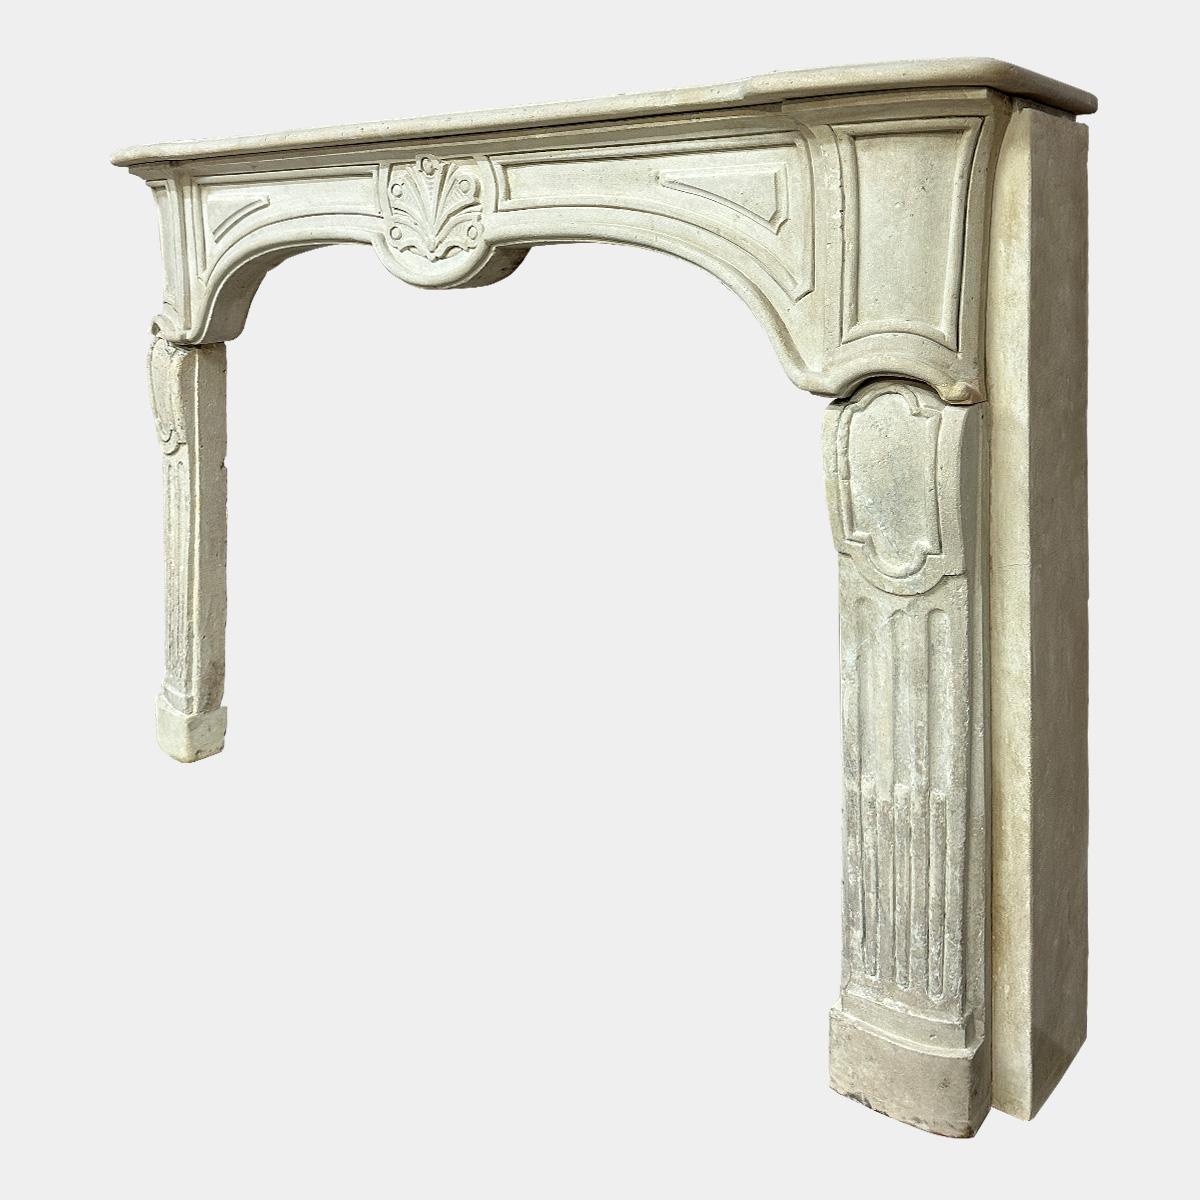 Late 18th Century An Antique 18th century Provincial French Stone Fireplace Mantel  For Sale